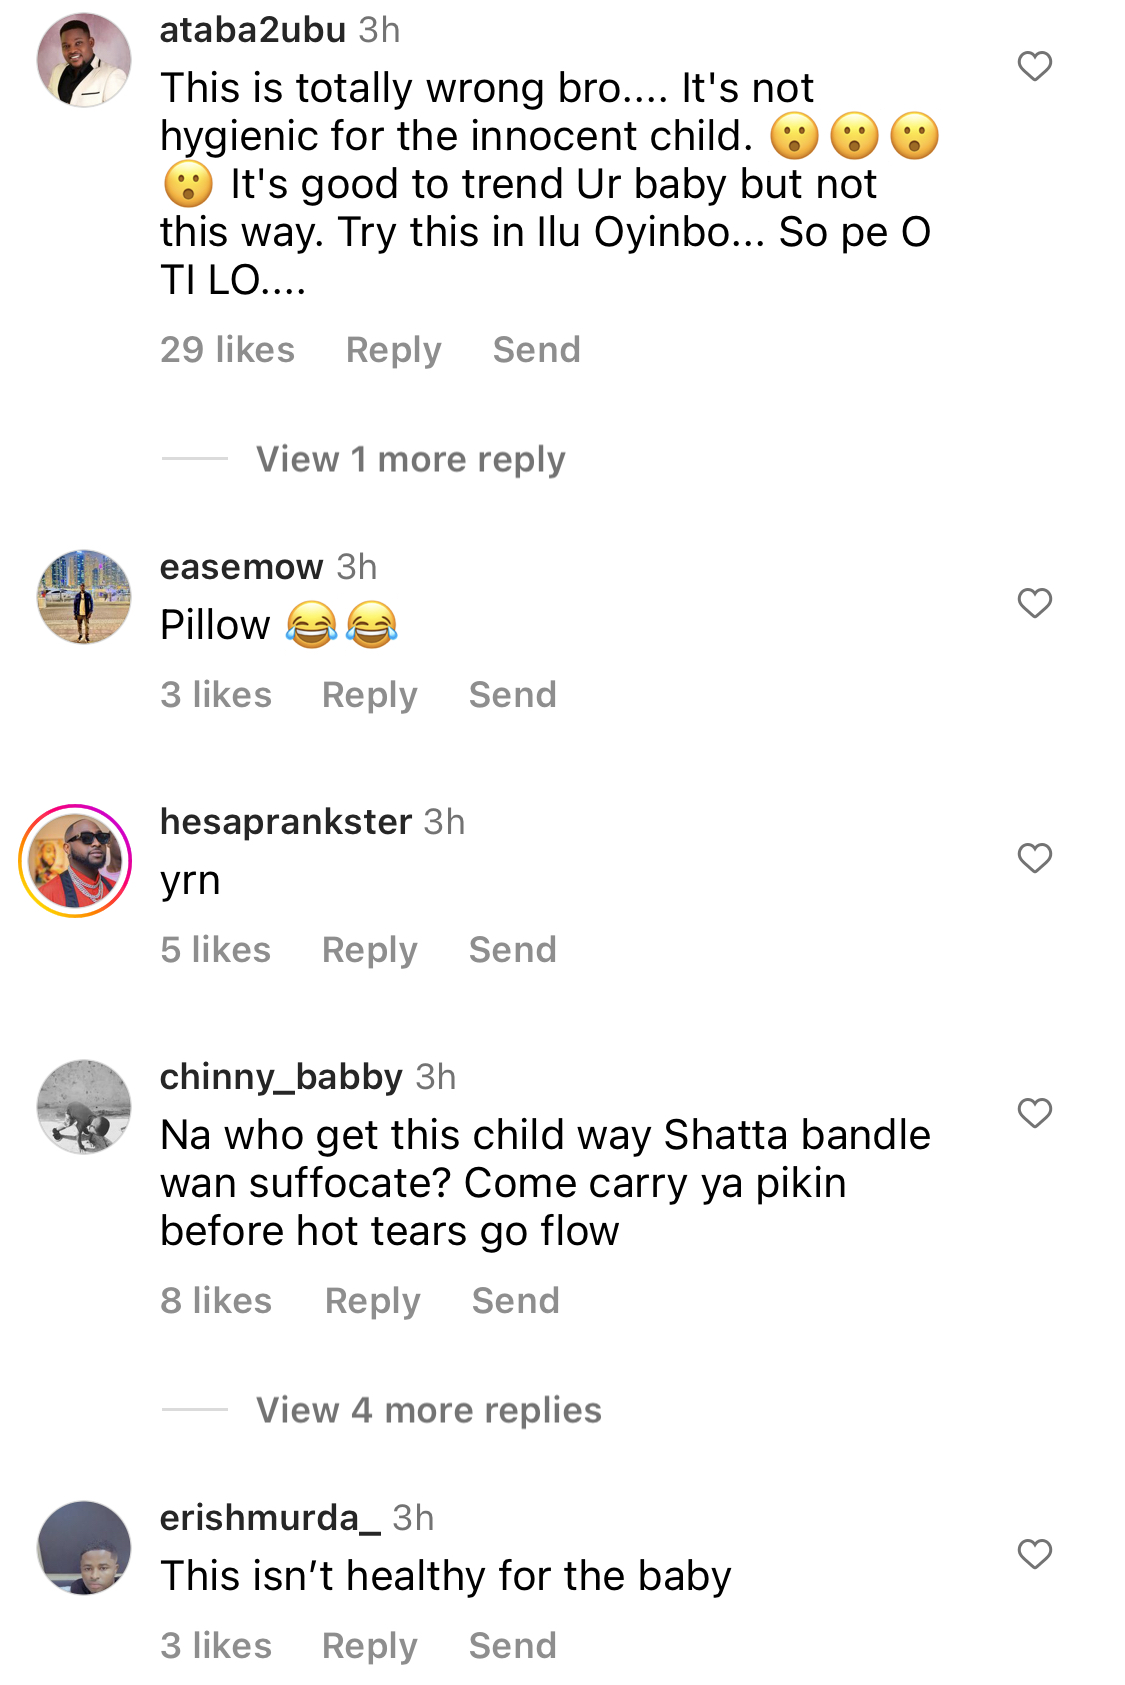 That baby can’t breathe - Fans express worry as Shatta Bandle covers child in money [video]